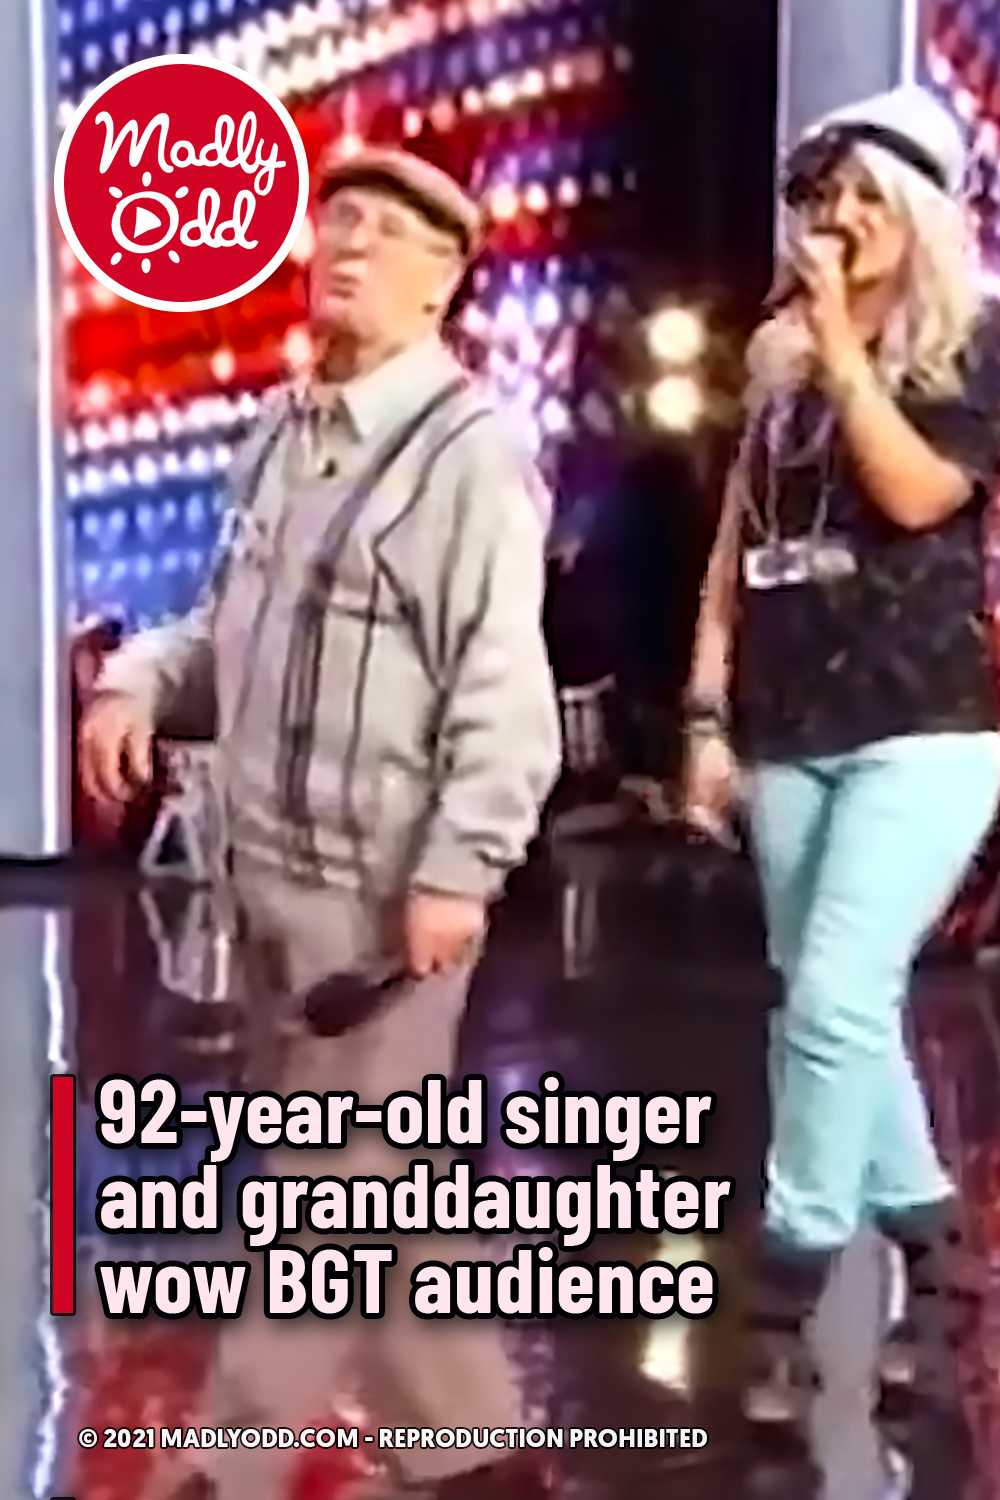 92-year-old singer and granddaughter wow BGT audience